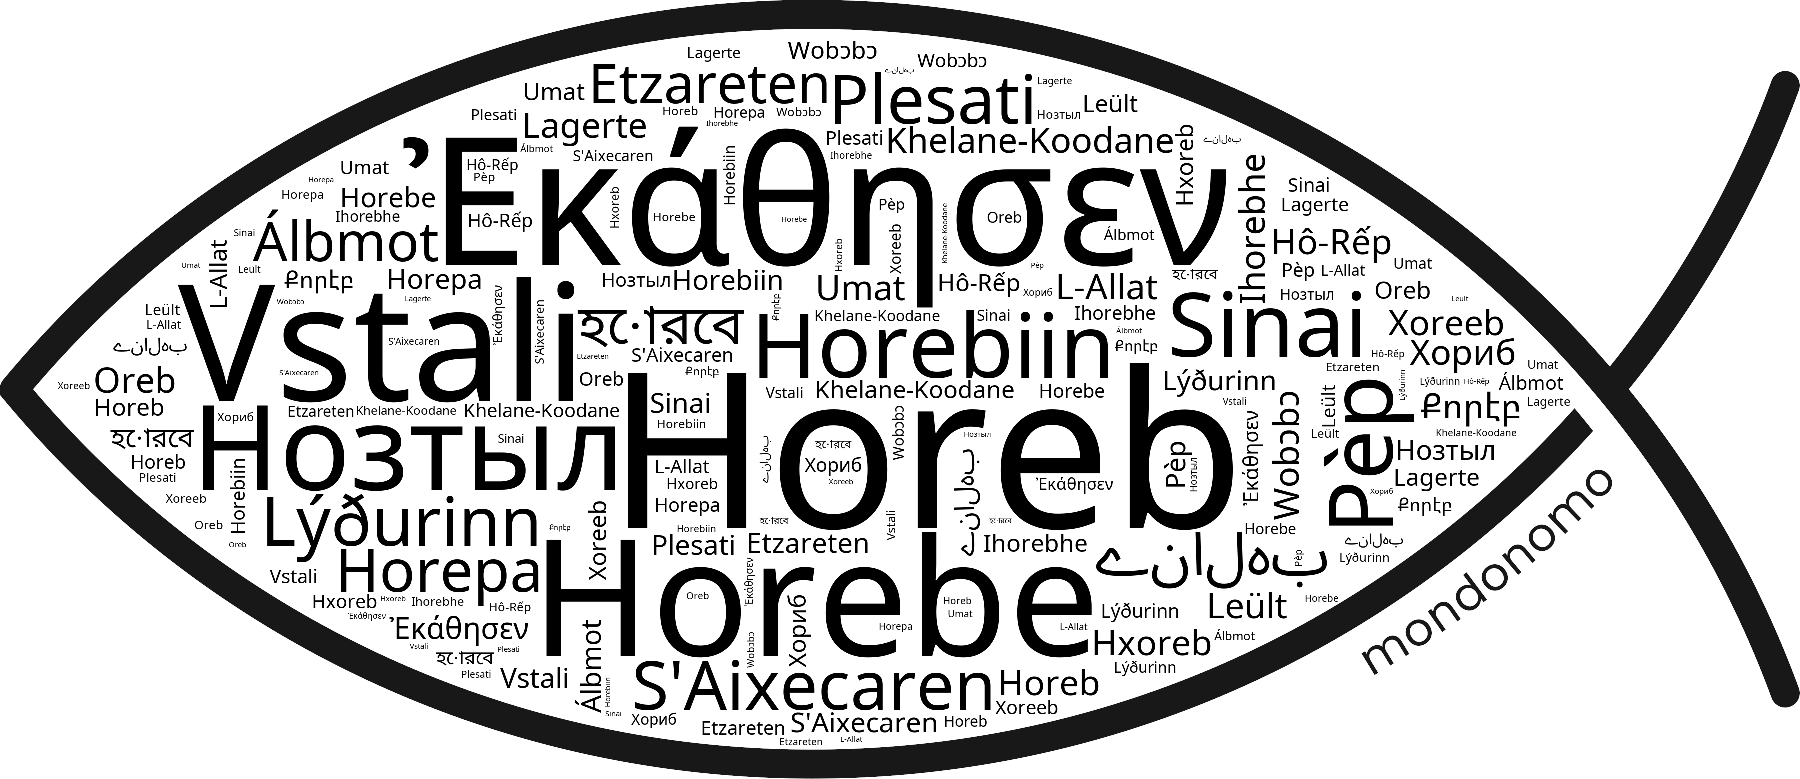 Name Horeb in the world's Bibles